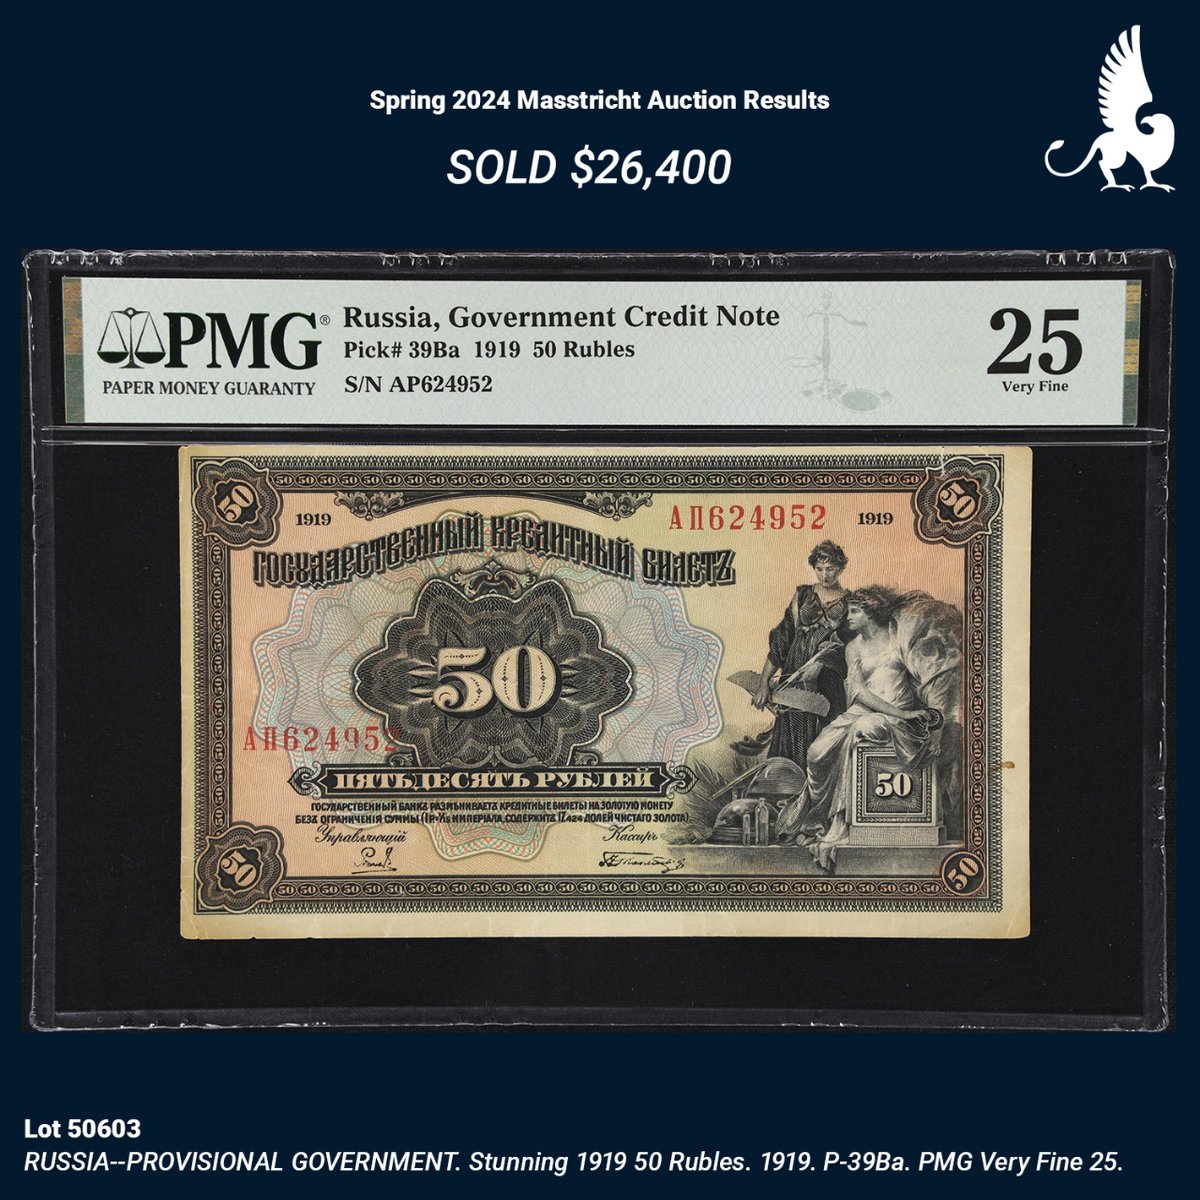 Highlight Reel: Top 4 Standout Lots from Our Spring 2024 Maastricht Paper Money Auction. 
#numismatics #banknotes  #worldpapermoney #currencycollection